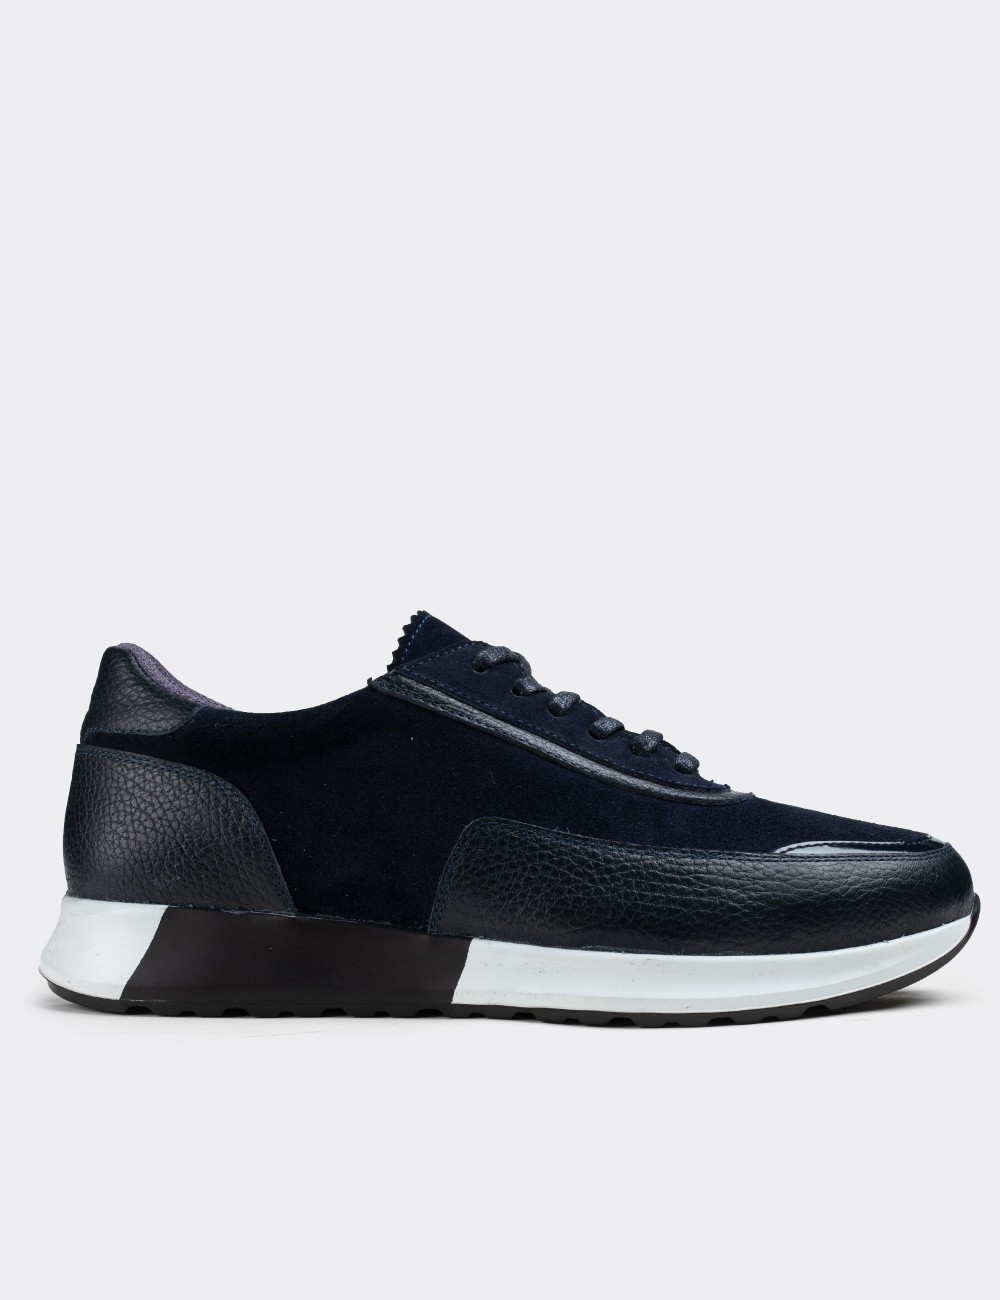 Navy Suede Leather Sneakers - 01819MLCVE01